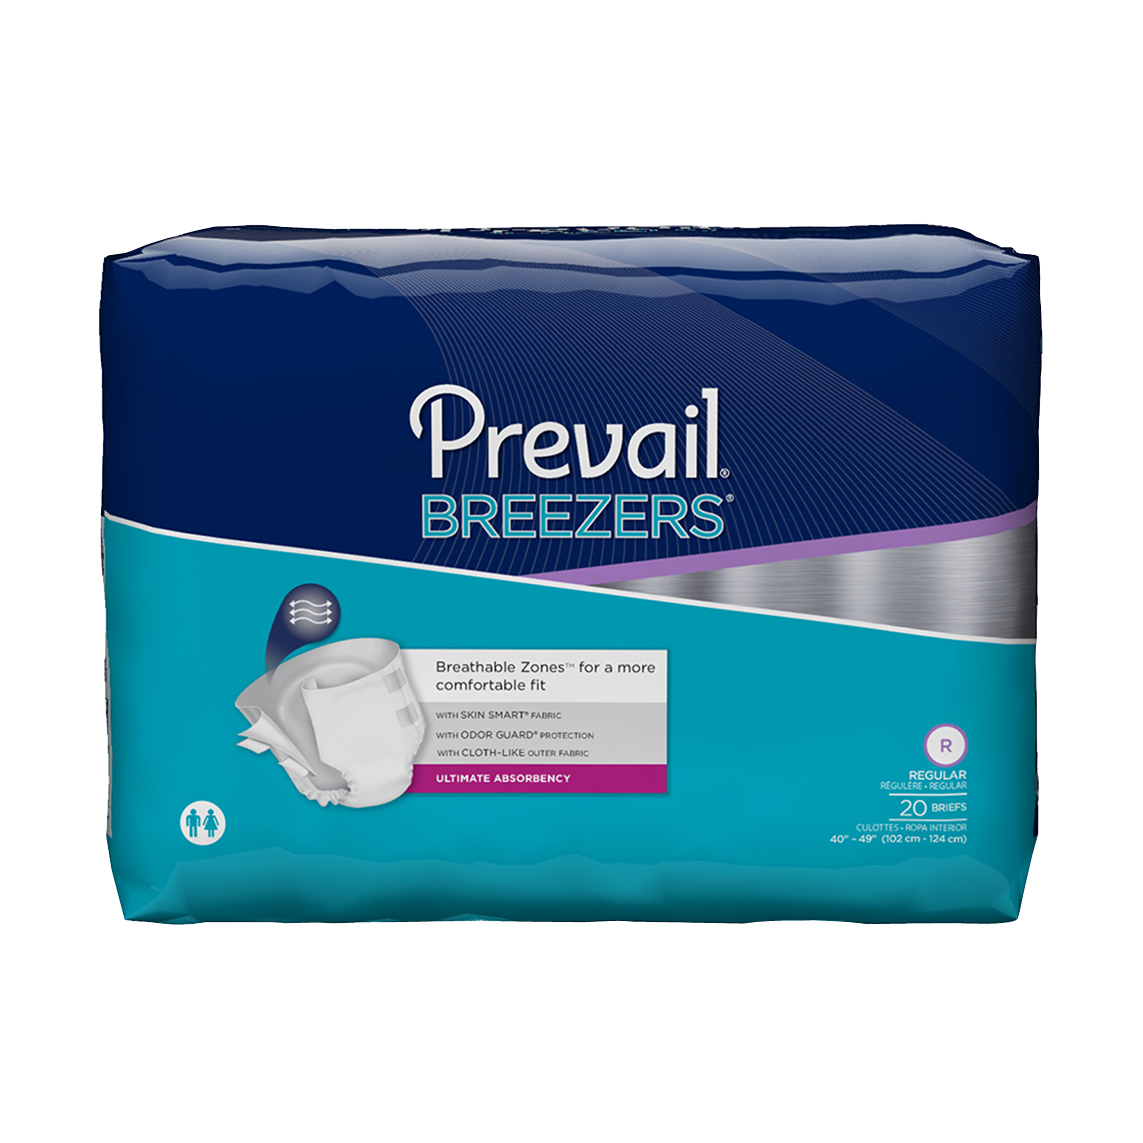 Adult diapers for heavy urinary incontinence | Prevail Breezers Absorbency Adult Briefs MyLiberty.Life